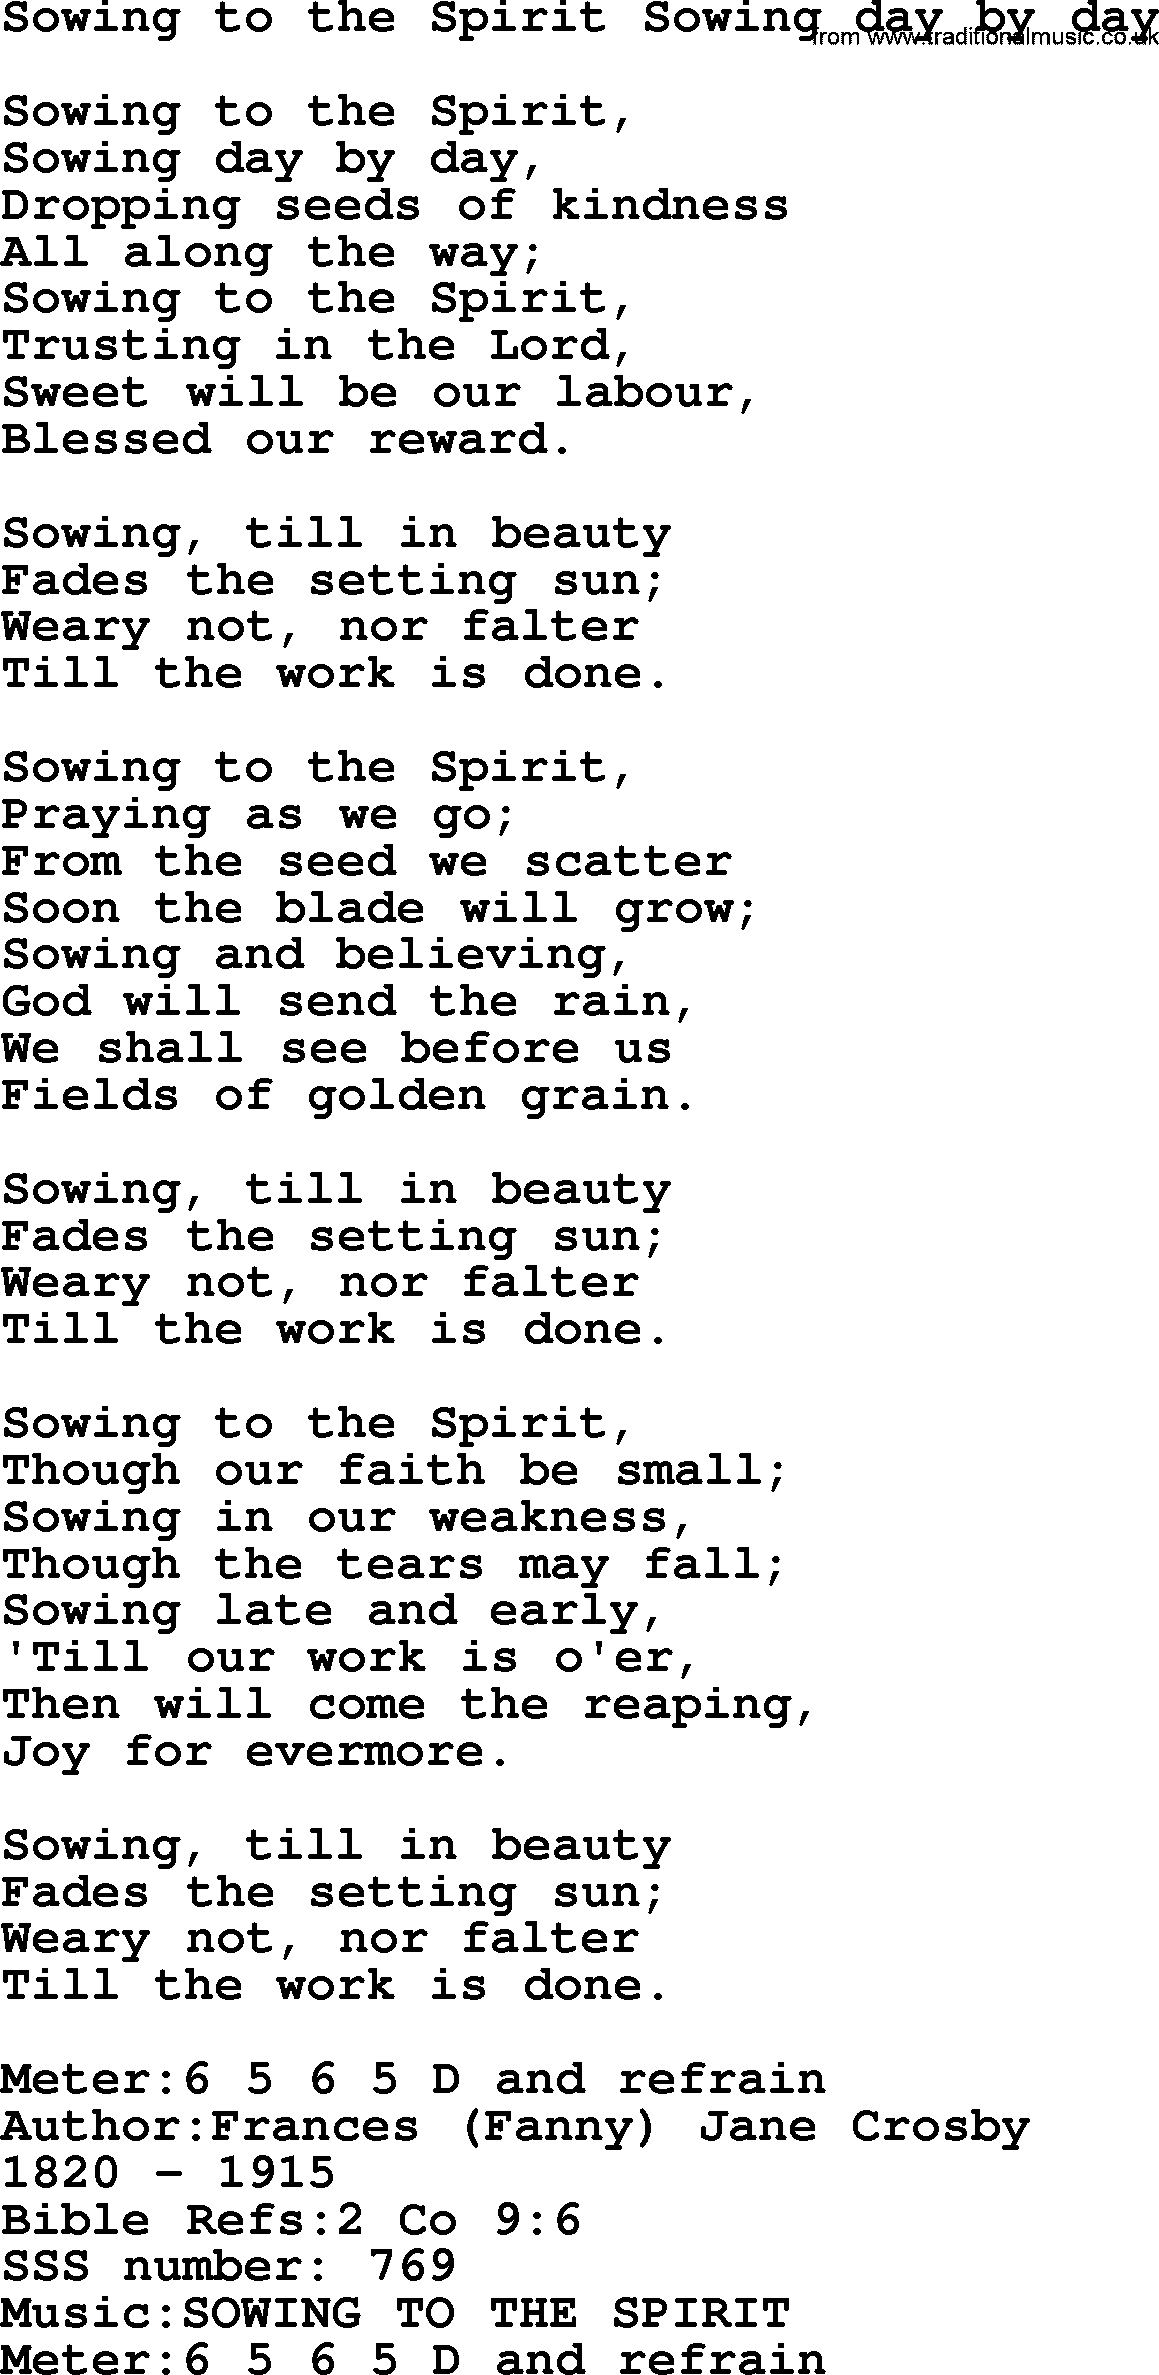 Sacred Songs and Solos complete, 1200 Hymns, title: Sowing To The Spirit Sowing Day By Day, lyrics and PDF